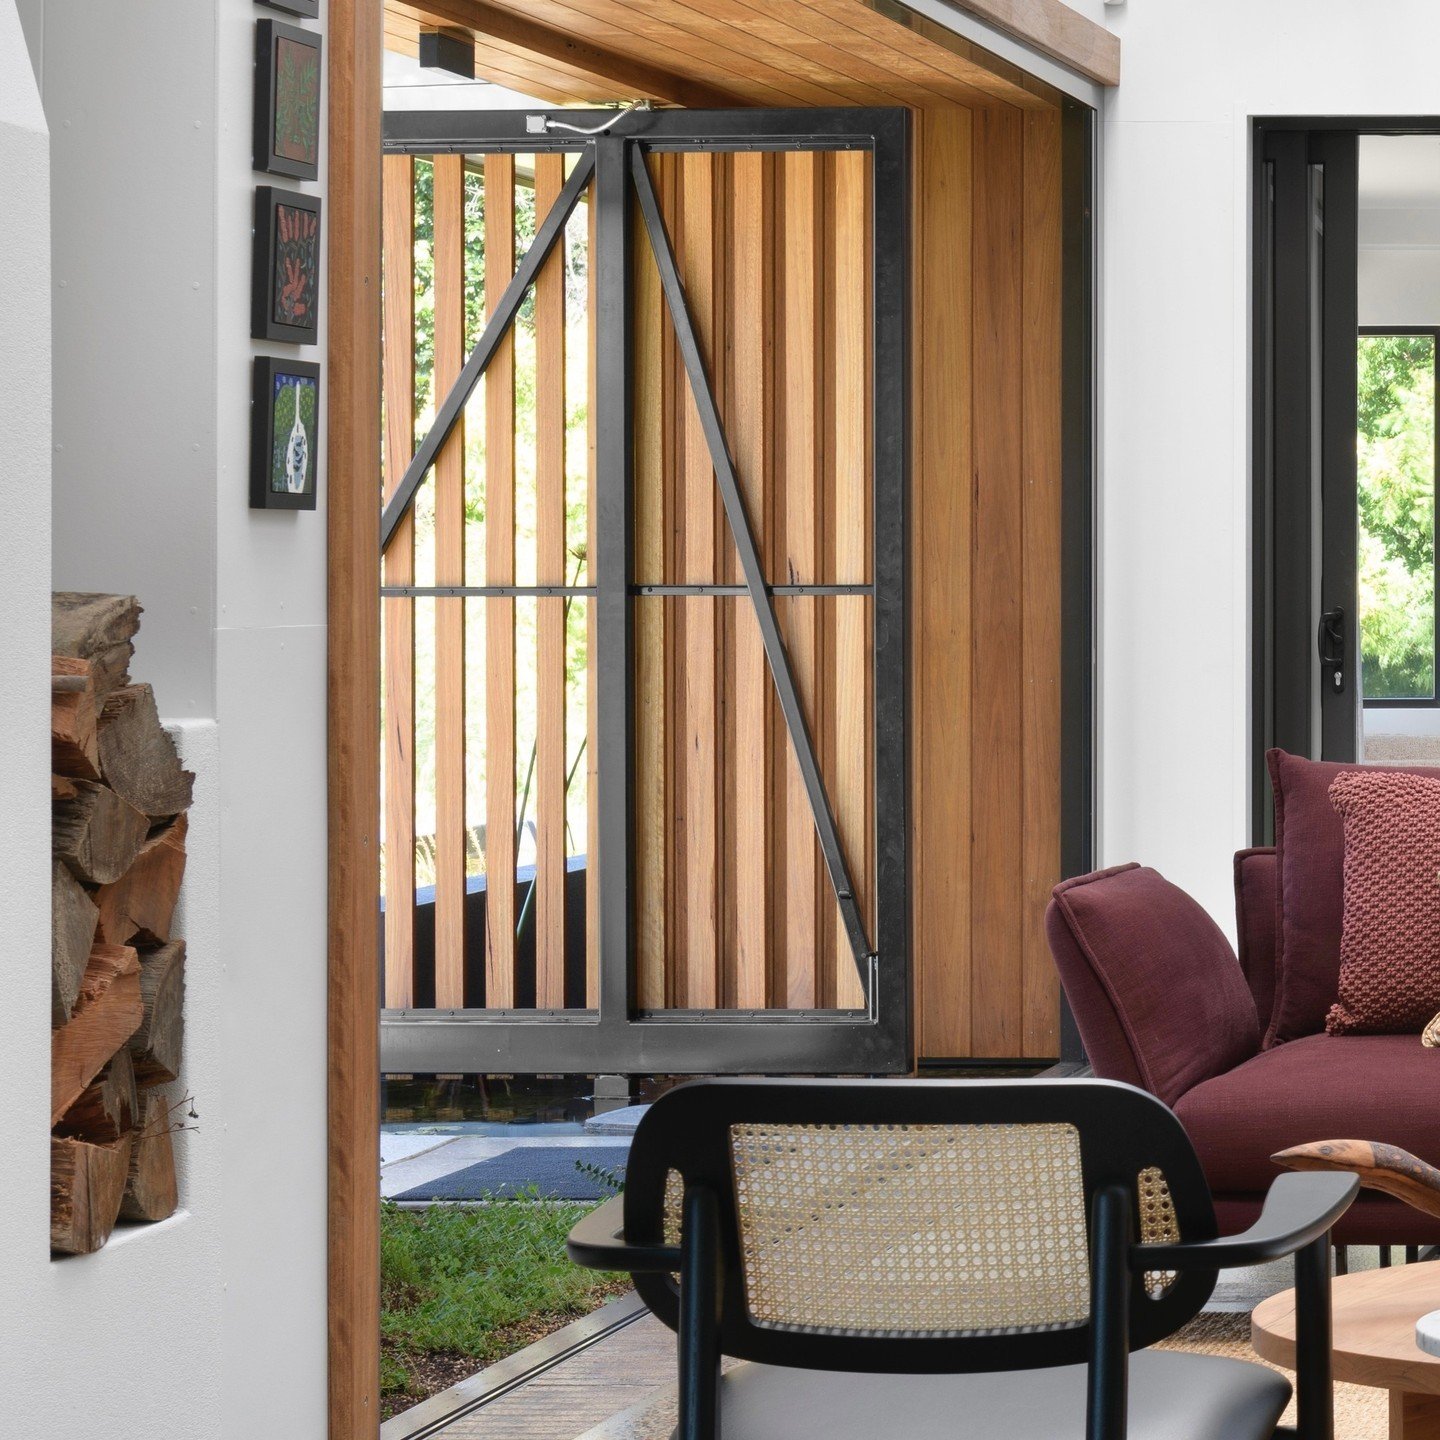 //AUSTRALIAN TIMBER// we selected Blackbutt timber for the entry door for a mid tone, warmth supported with almost black framing (I love to choose a &lsquo;not quite black&rsquo; for architectural finishes as its more interesting &amp;subtle), adding